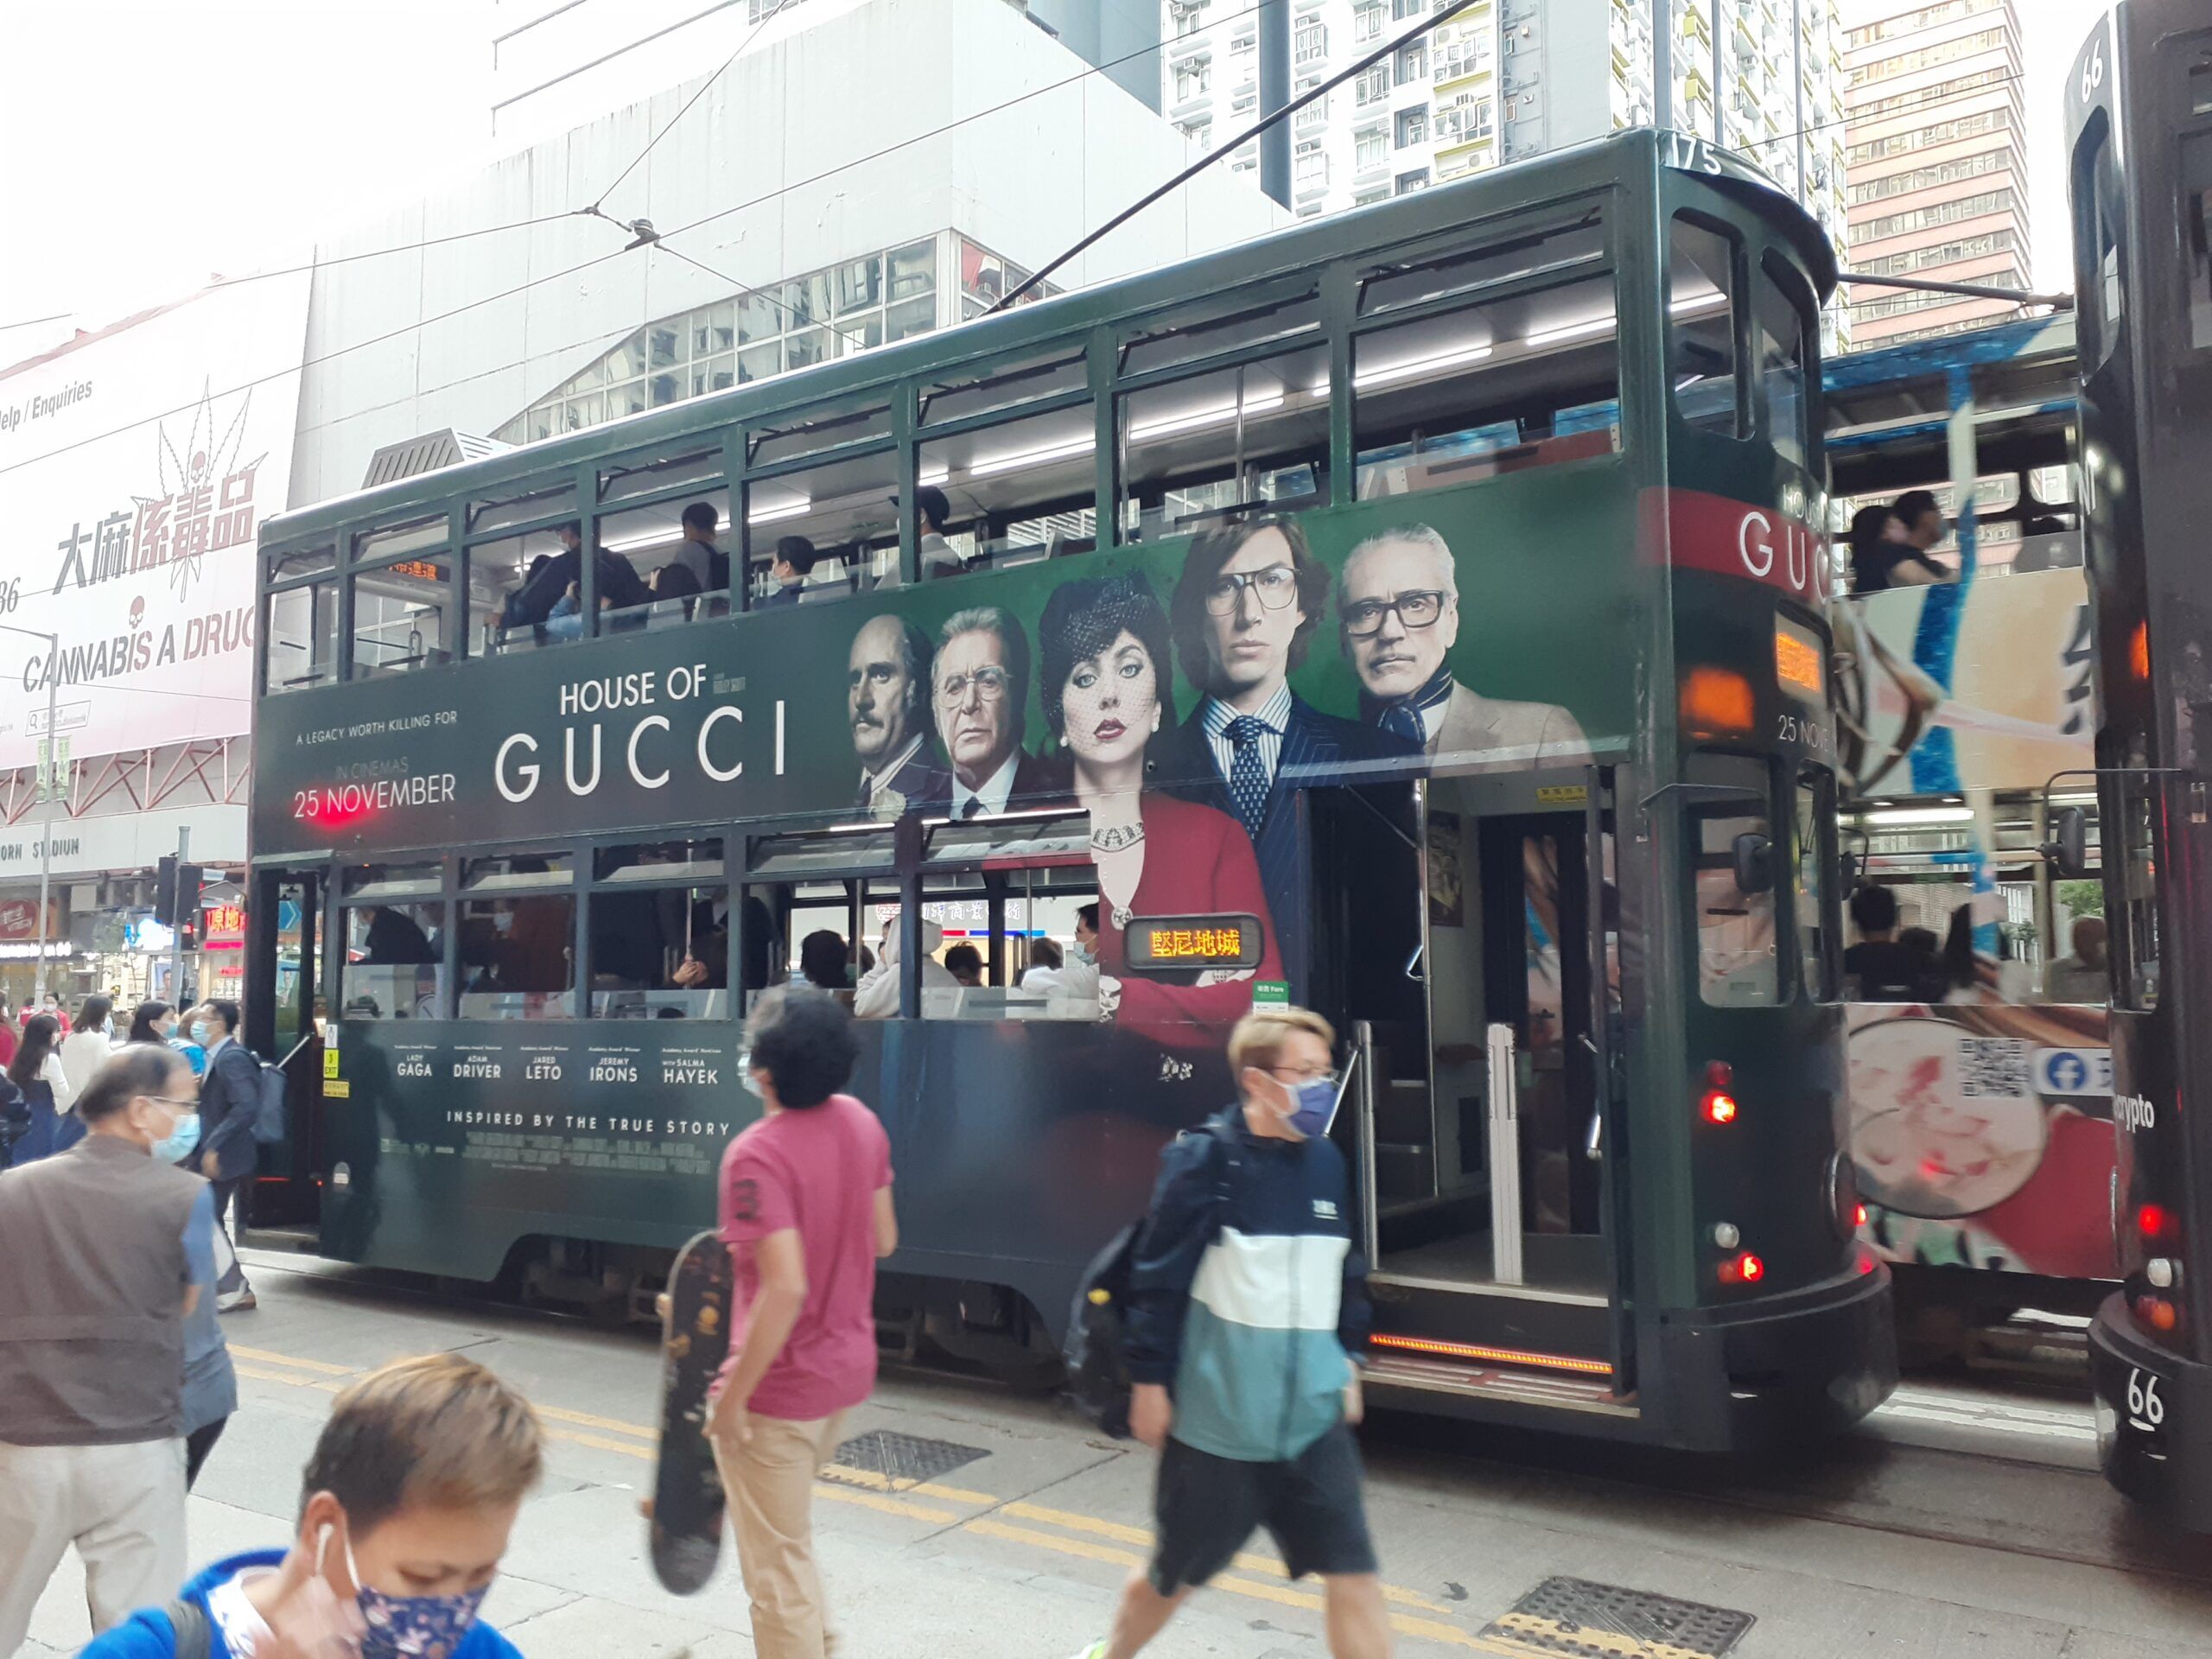 House of Gucci bus advert